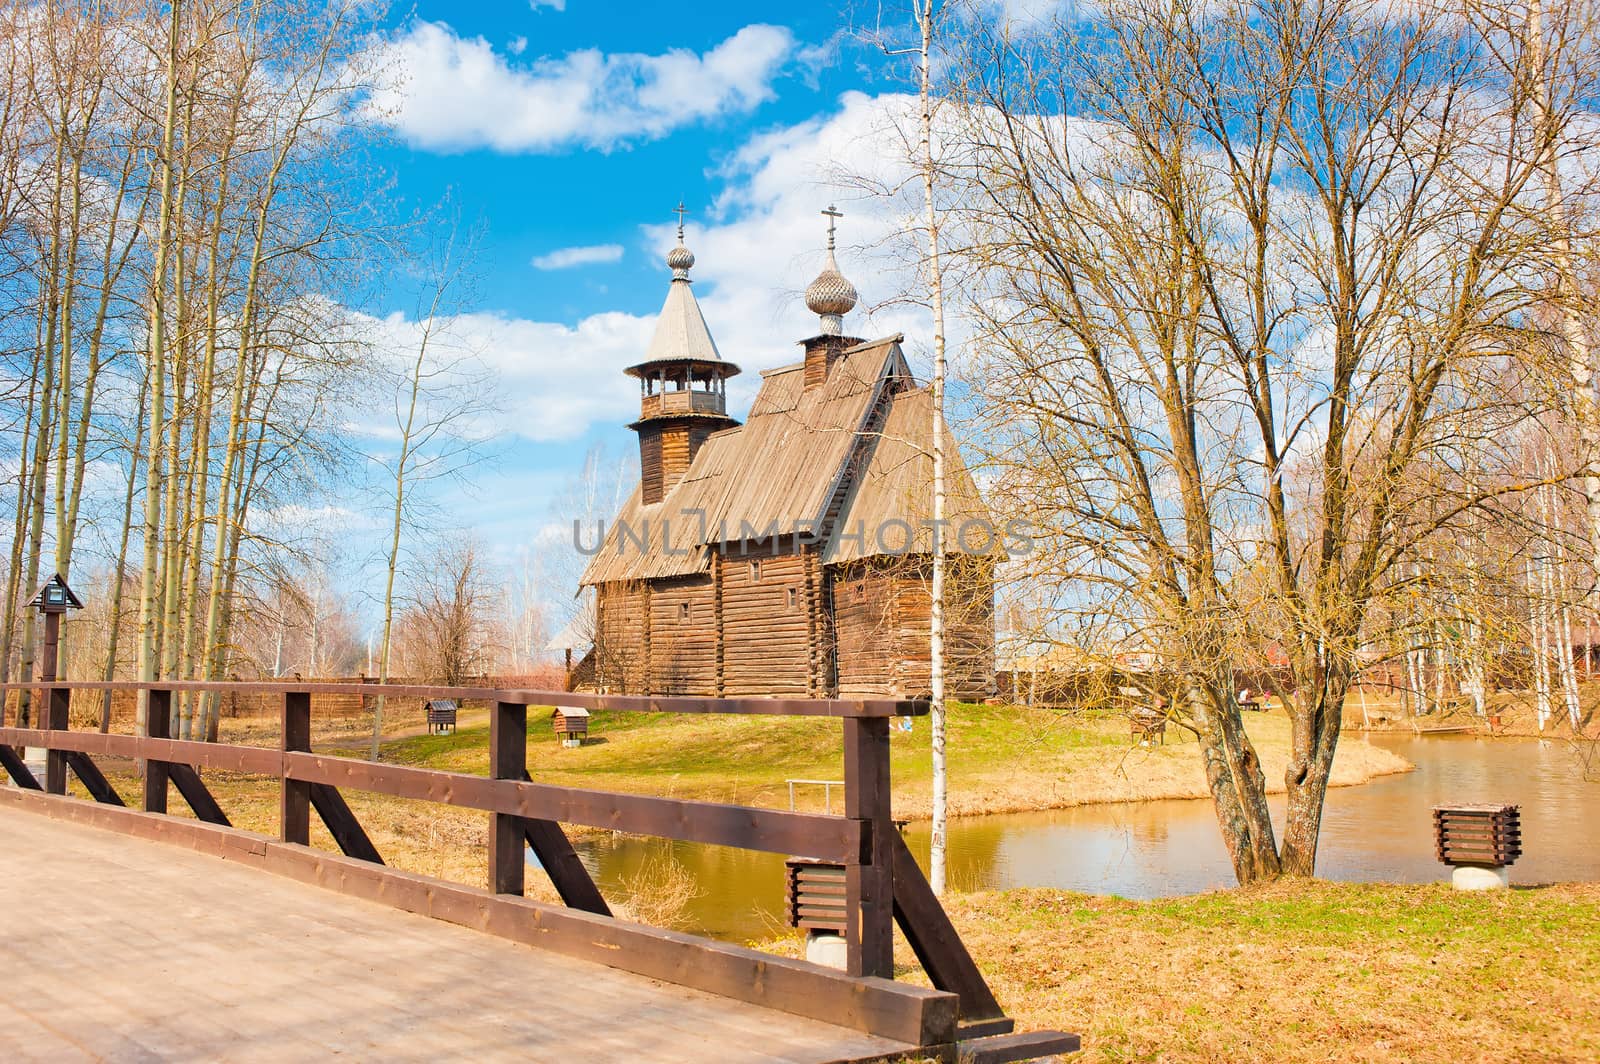 Wooden Russian Orthodox church in the countryside.